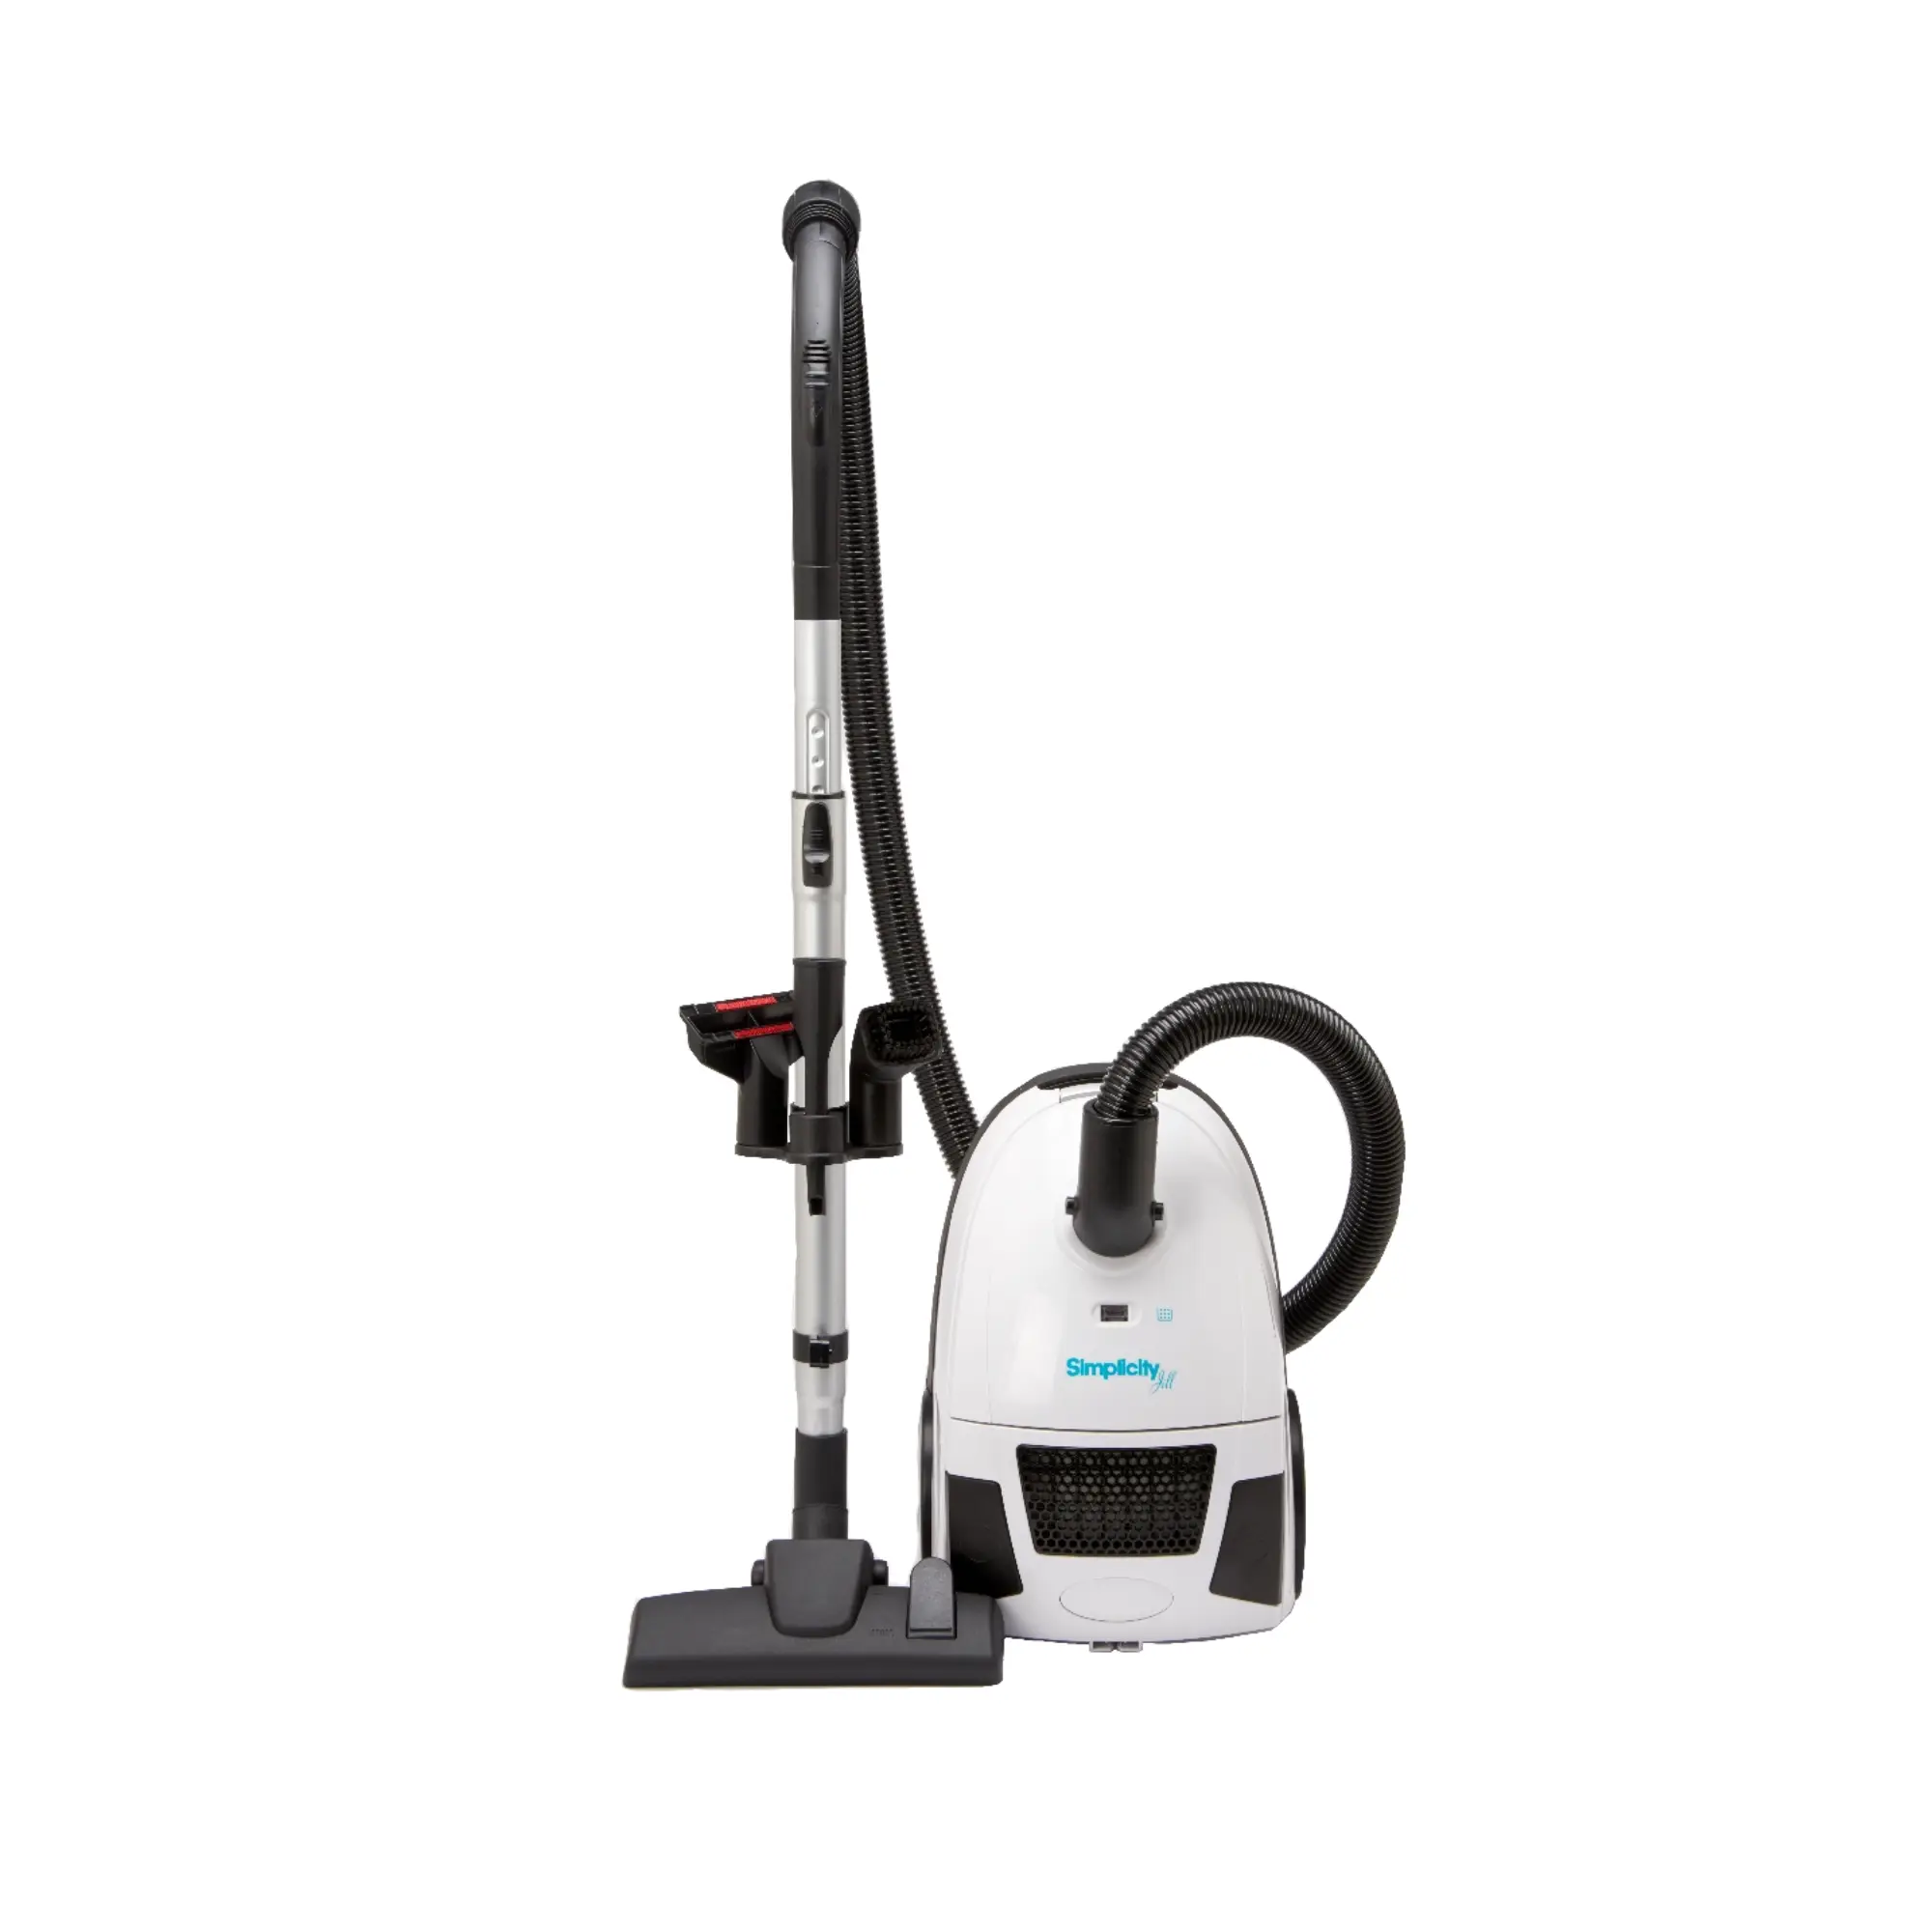 Simplicity Jill compact canister vacuum.